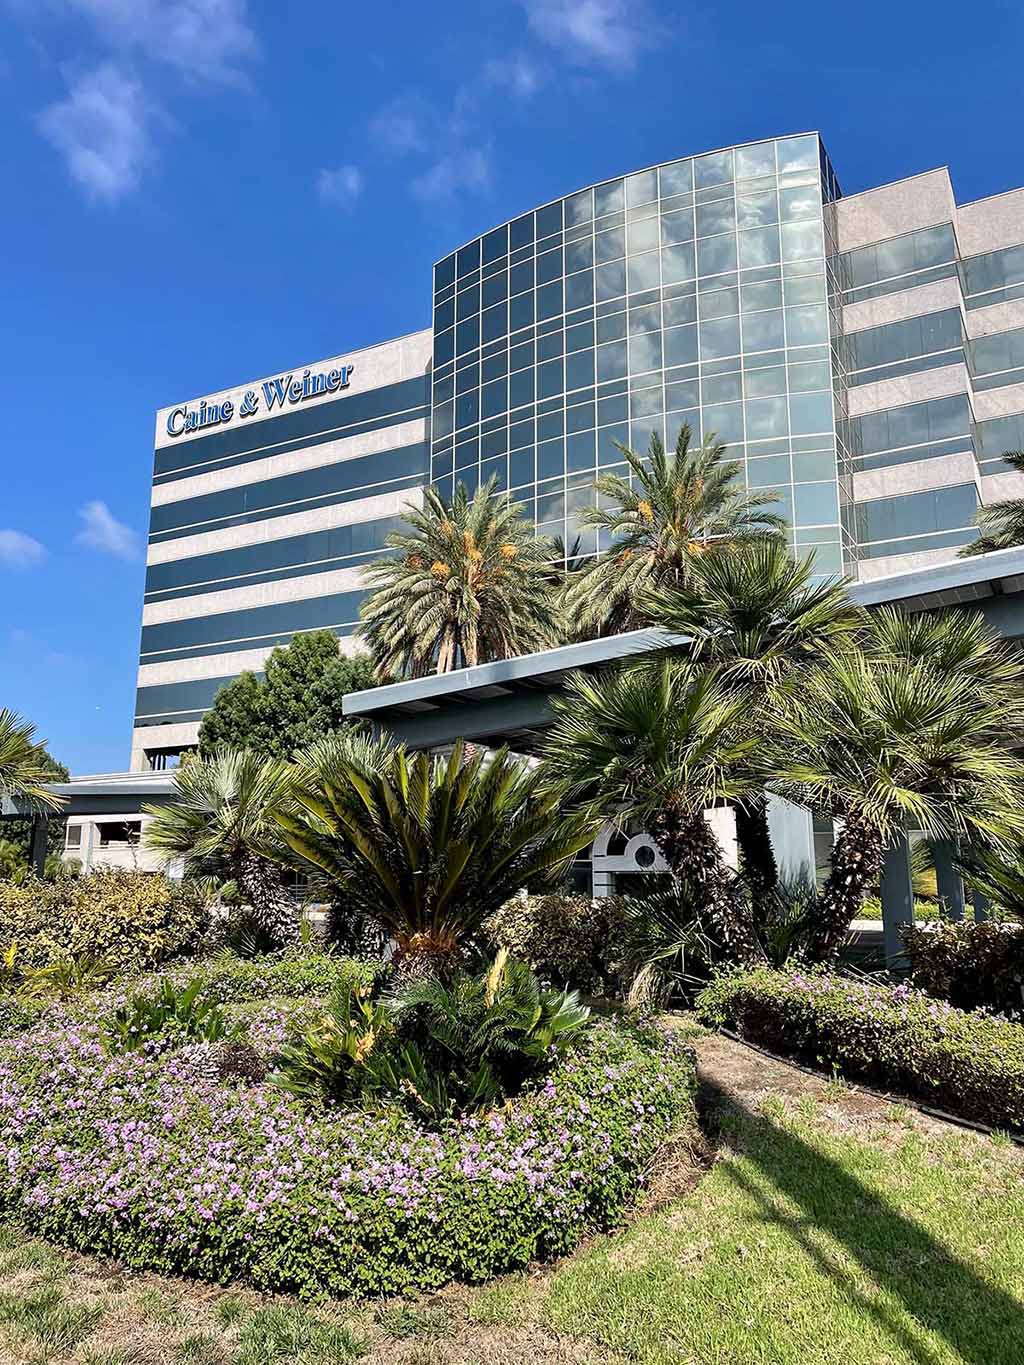 Southern California Multi-Specialty Center serves patients from Universal City